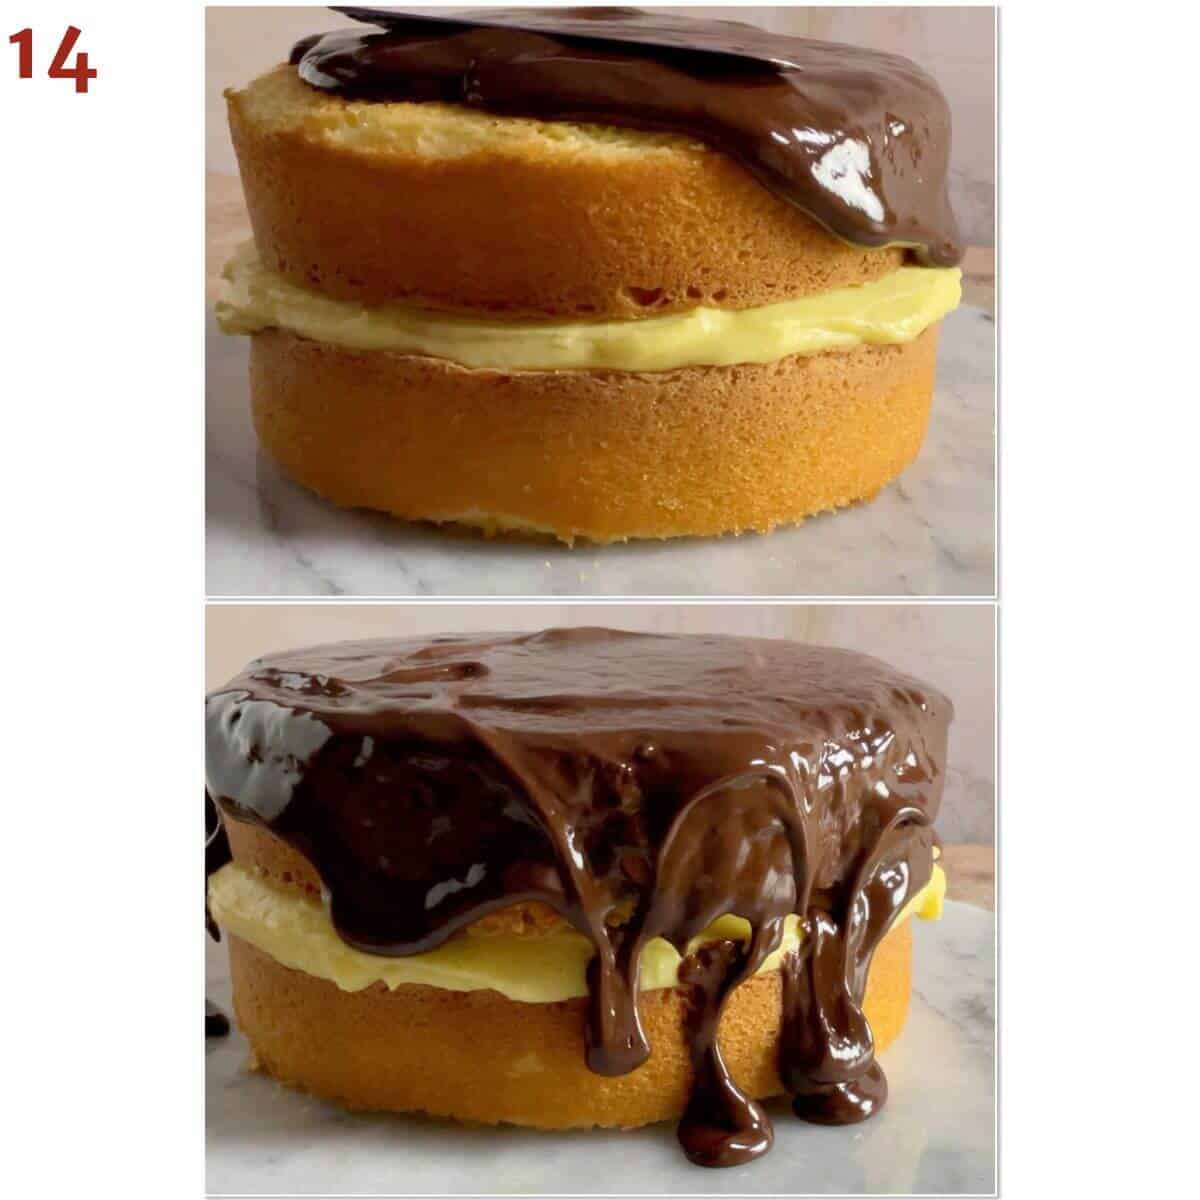 Collage of pouring ganache on top of hot milk cake layered with pastry cream filling.